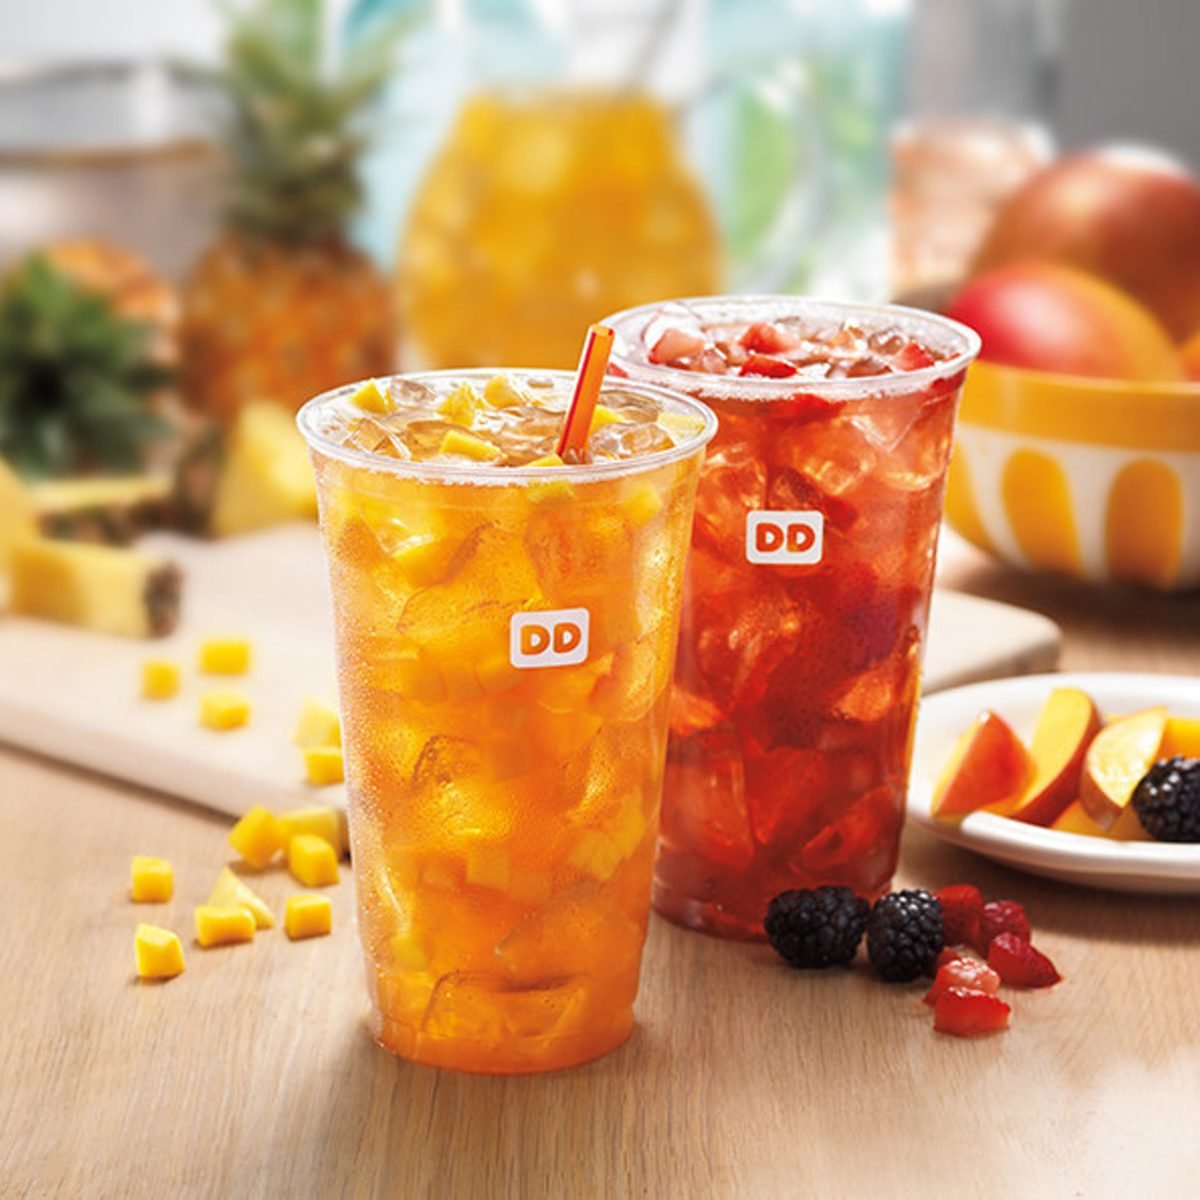 Dunkin' Donuts Introduces New Fruited Iced Teas in New England. (Credit: Dunkin' Donuts) (PRNewsFoto/Dunkin' Donuts)